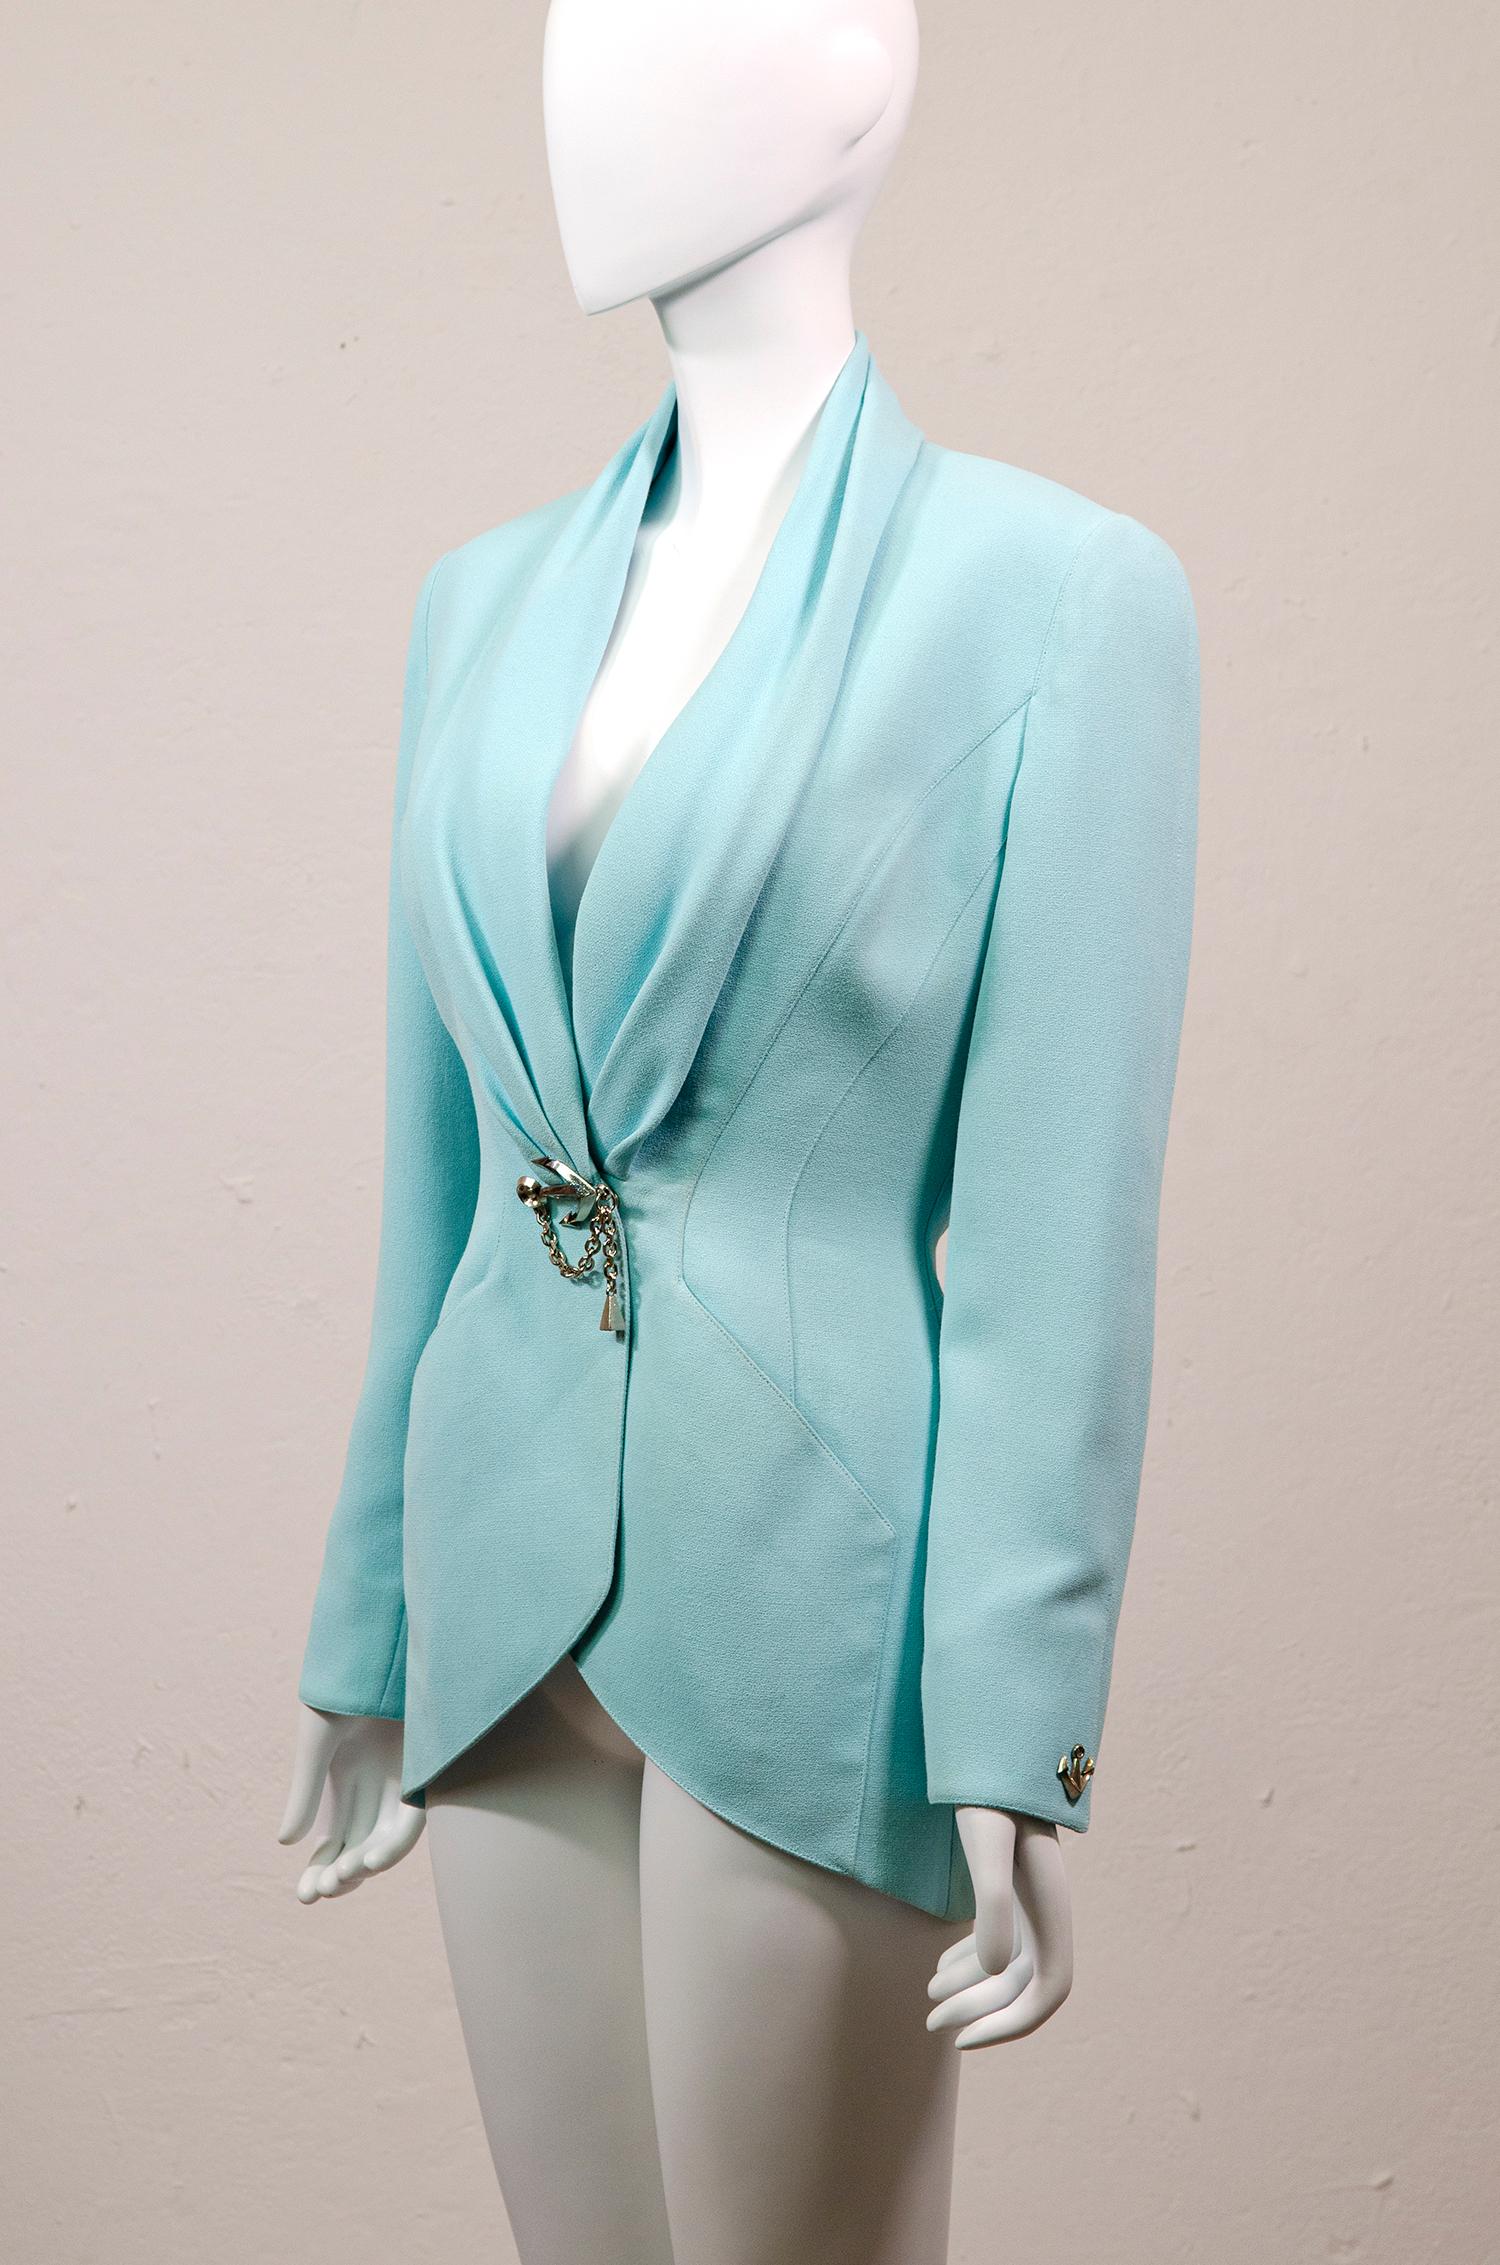 Thierry Mugler Vintage Pastel Blue Jacket with Anchors Nautical Aquatic 3